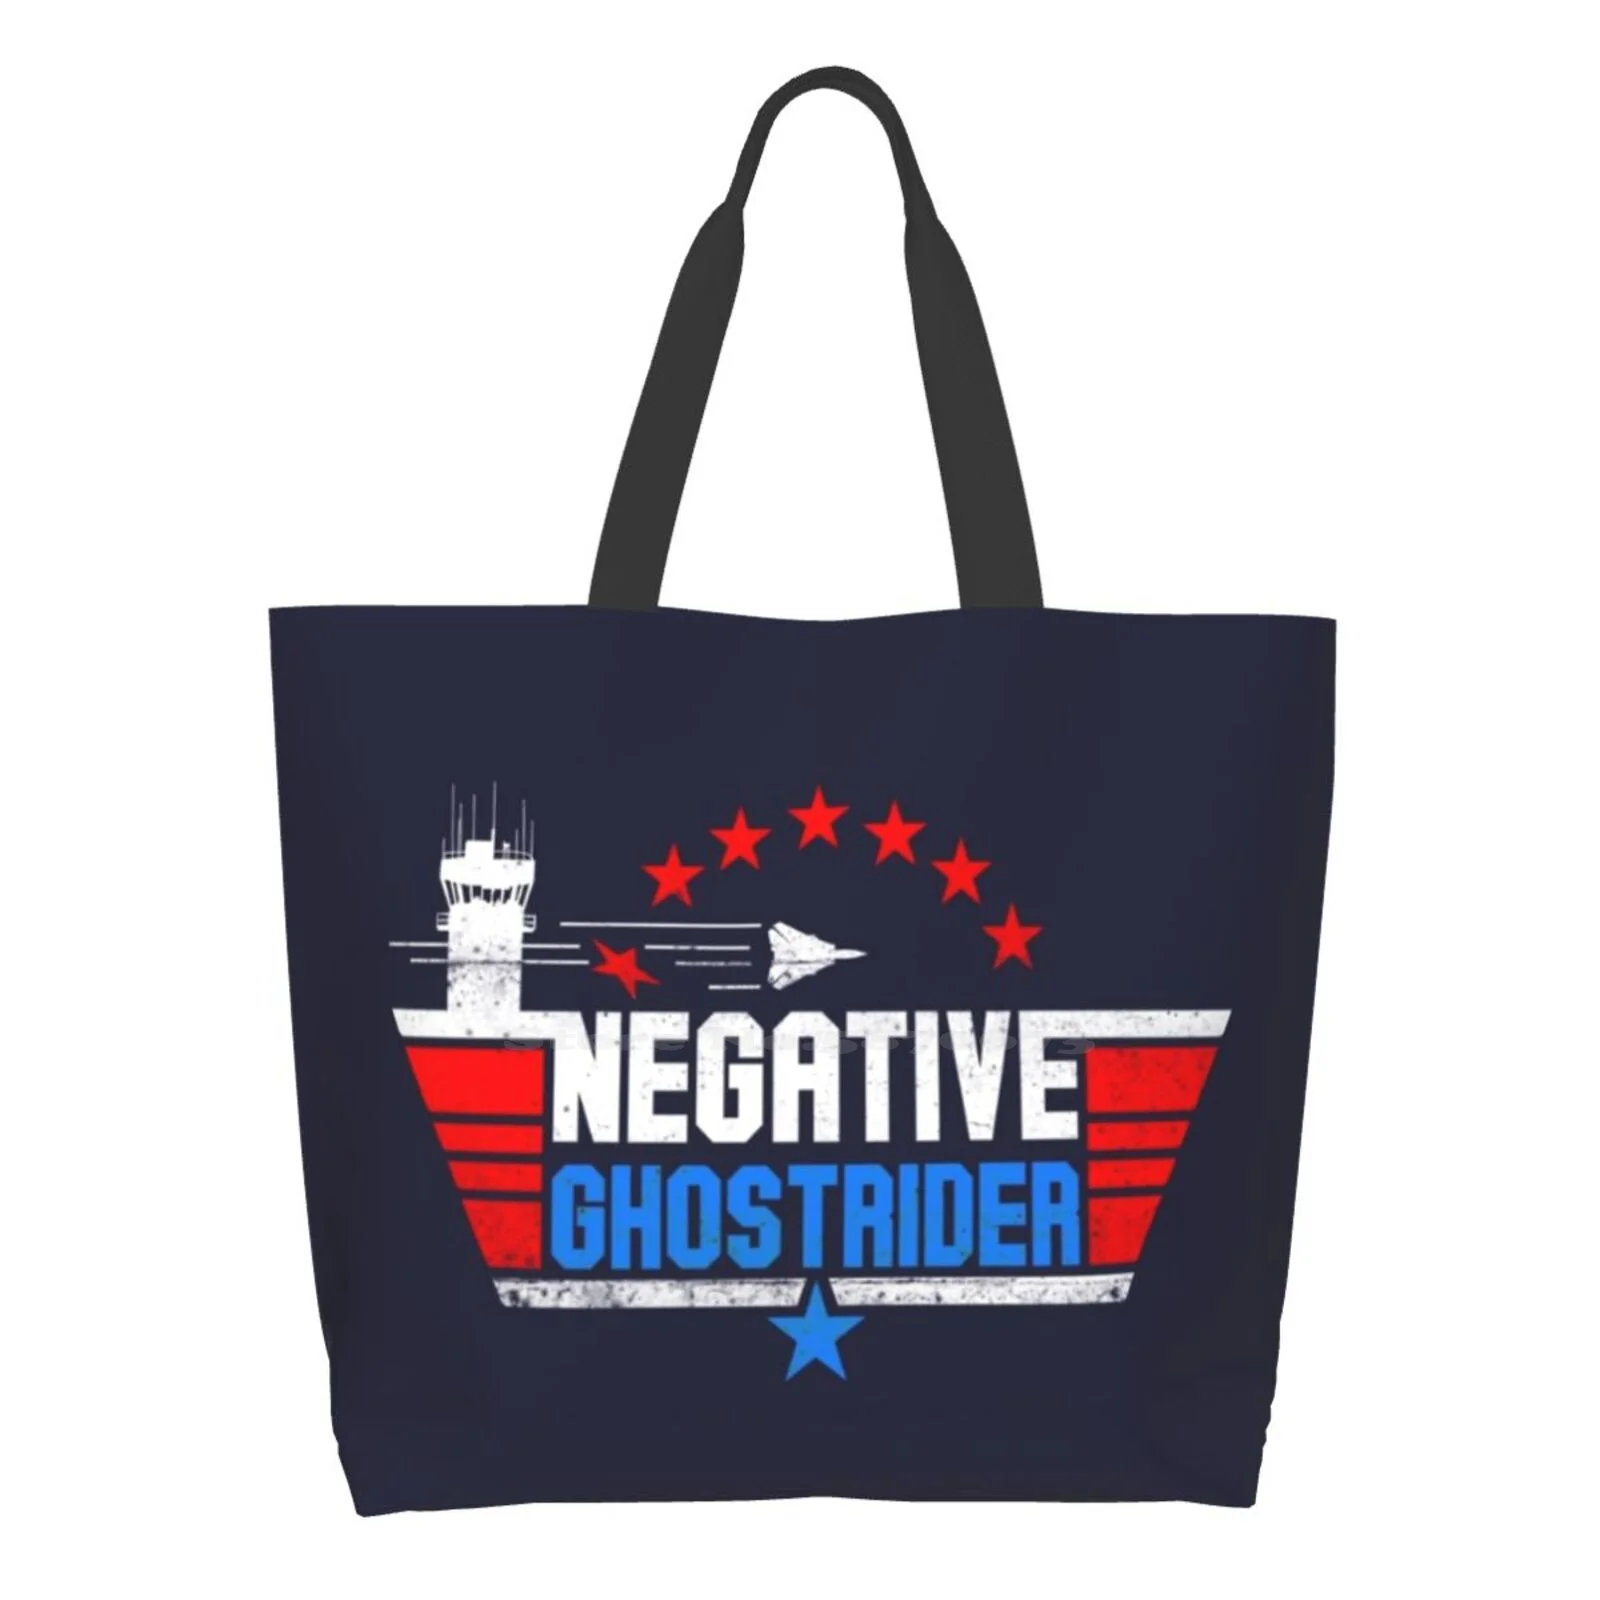 

Negative Ghost Rider - Women Shopping Bag Girl Tote Large Size 2 2 Negative Negative Ghost Rider Buzz The Tower Tomcat F14